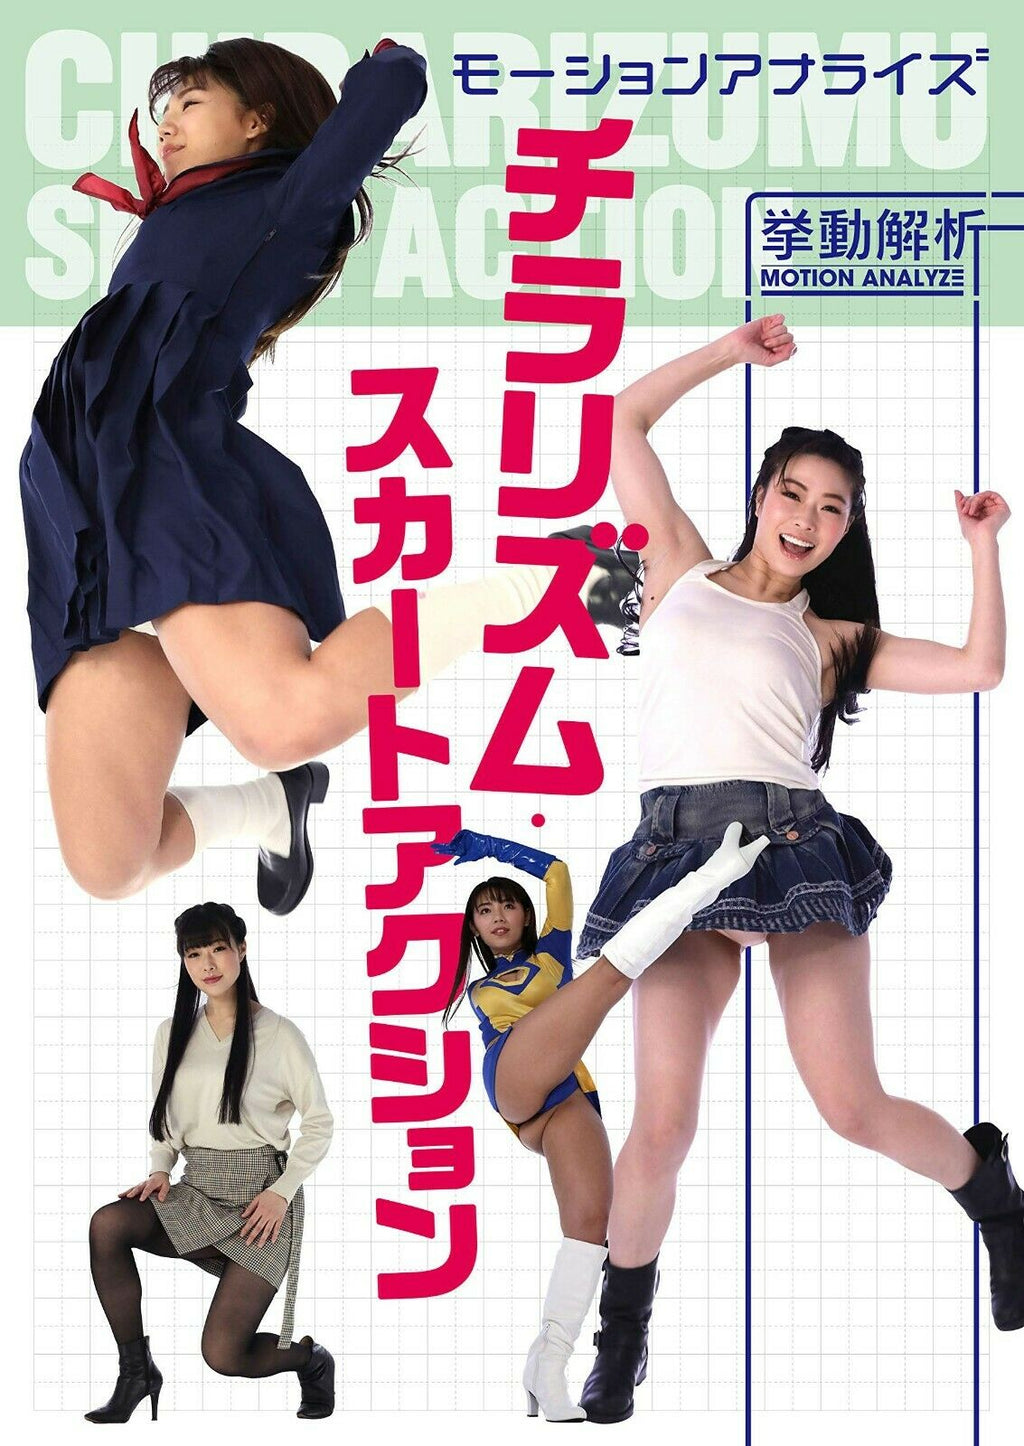 NEW How To Draw Manga Motion of Skirt Pose Book | JAPAN Upskirt Reference Book